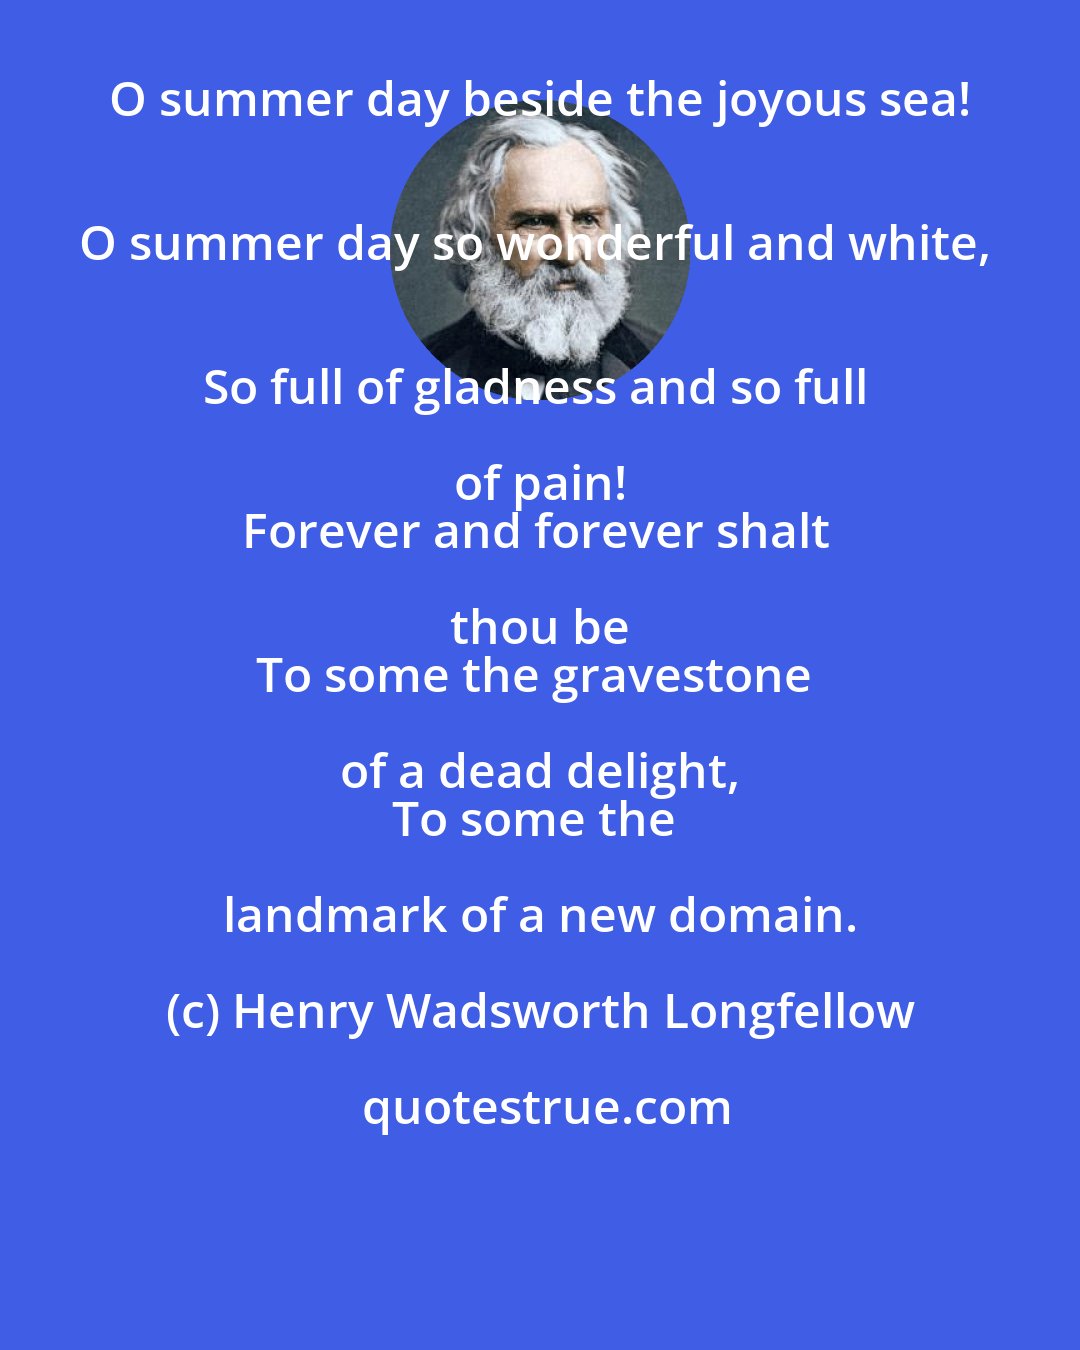 Henry Wadsworth Longfellow: O summer day beside the joyous sea! 
O summer day so wonderful and white, 
So full of gladness and so full of pain! 
Forever and forever shalt thou be 
To some the gravestone of a dead delight, 
To some the landmark of a new domain.